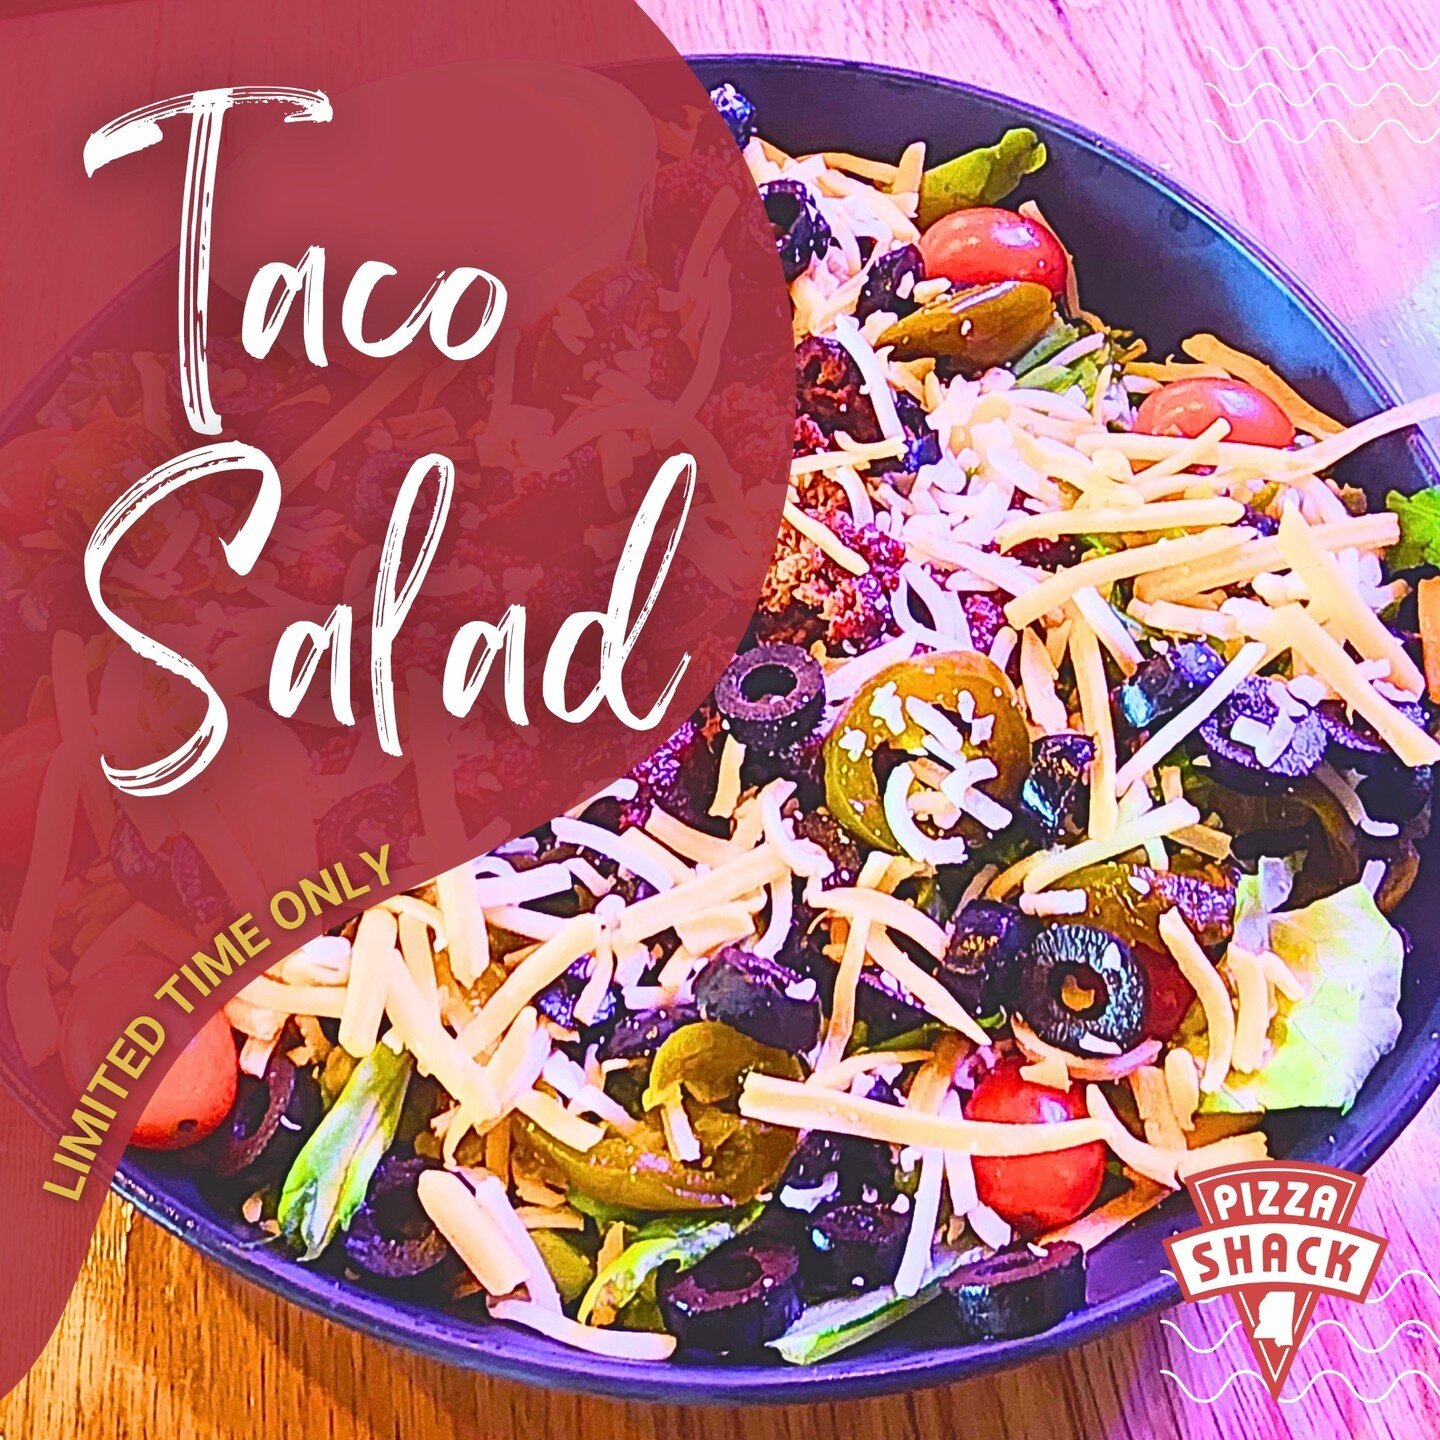 Who said salads had to be boring? Pizza Shack's Taco Salad is the perfect combination of healthy and indulgent! 

Get ready to fall in love with our newest creation, made with fresh Bibb lettuce, seasoned beef, jalapeno, black olive, Doritos, and two